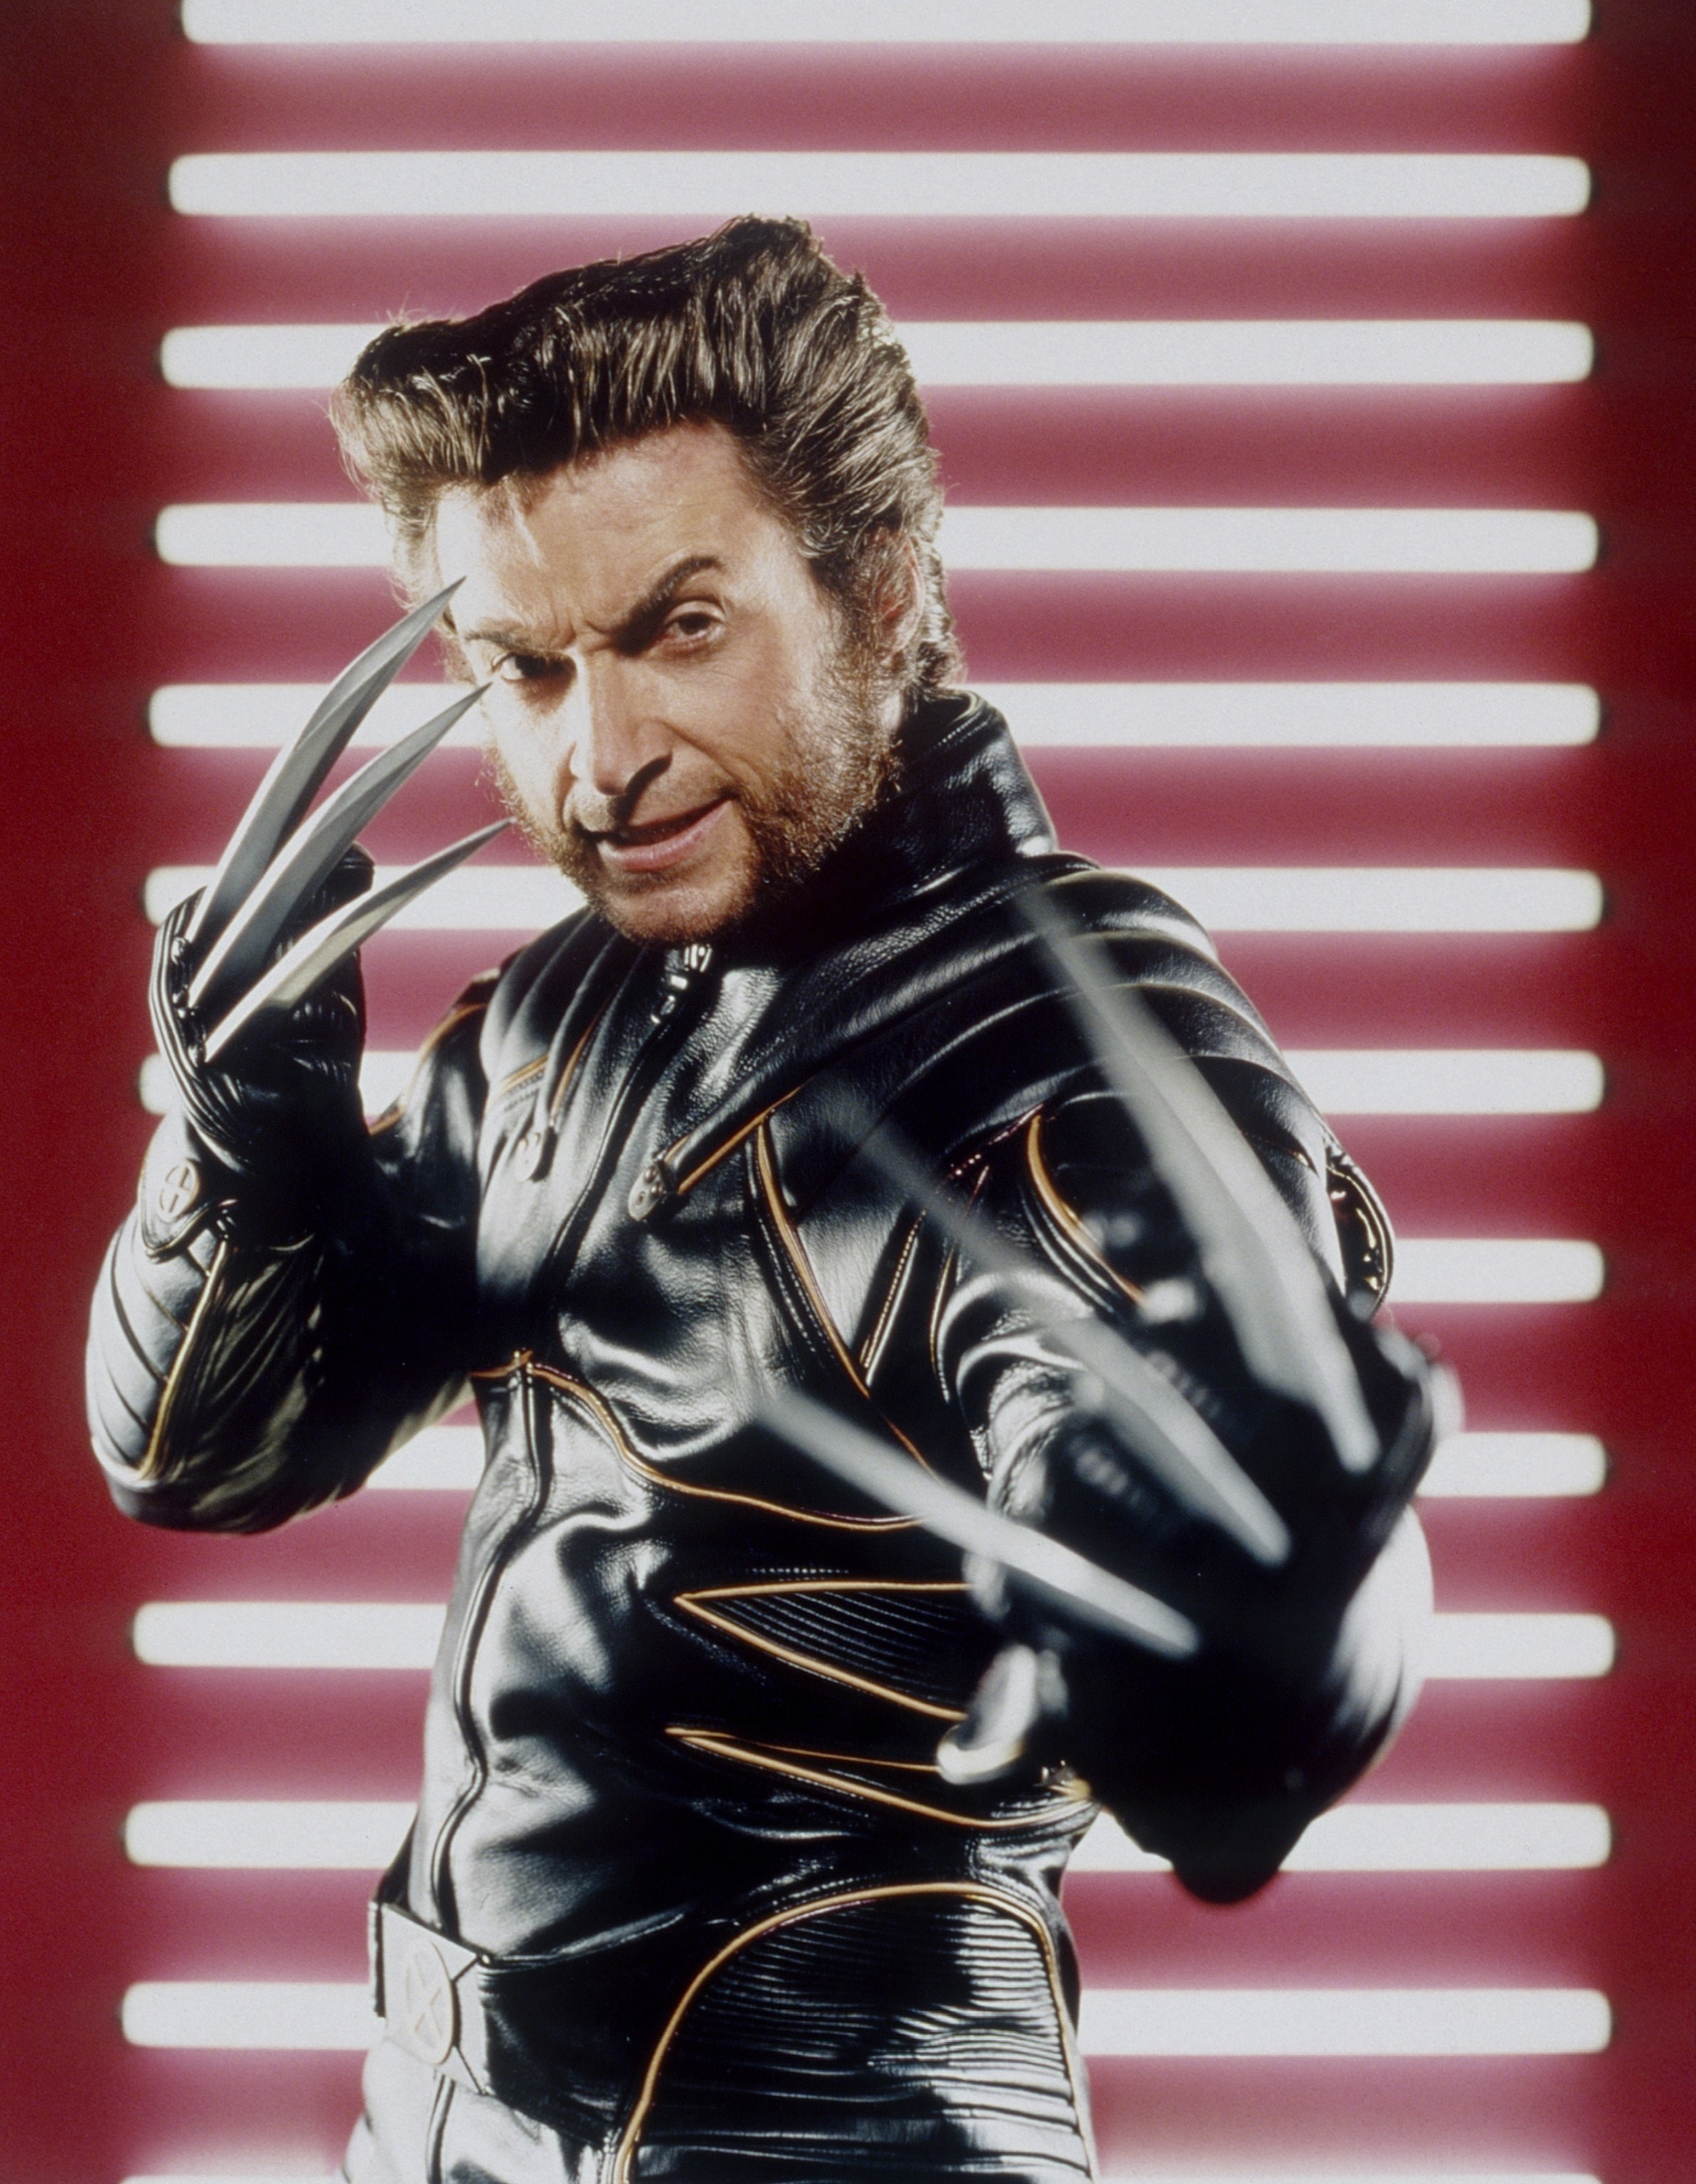 Jackman as Logan in a promotional shot for X-Men